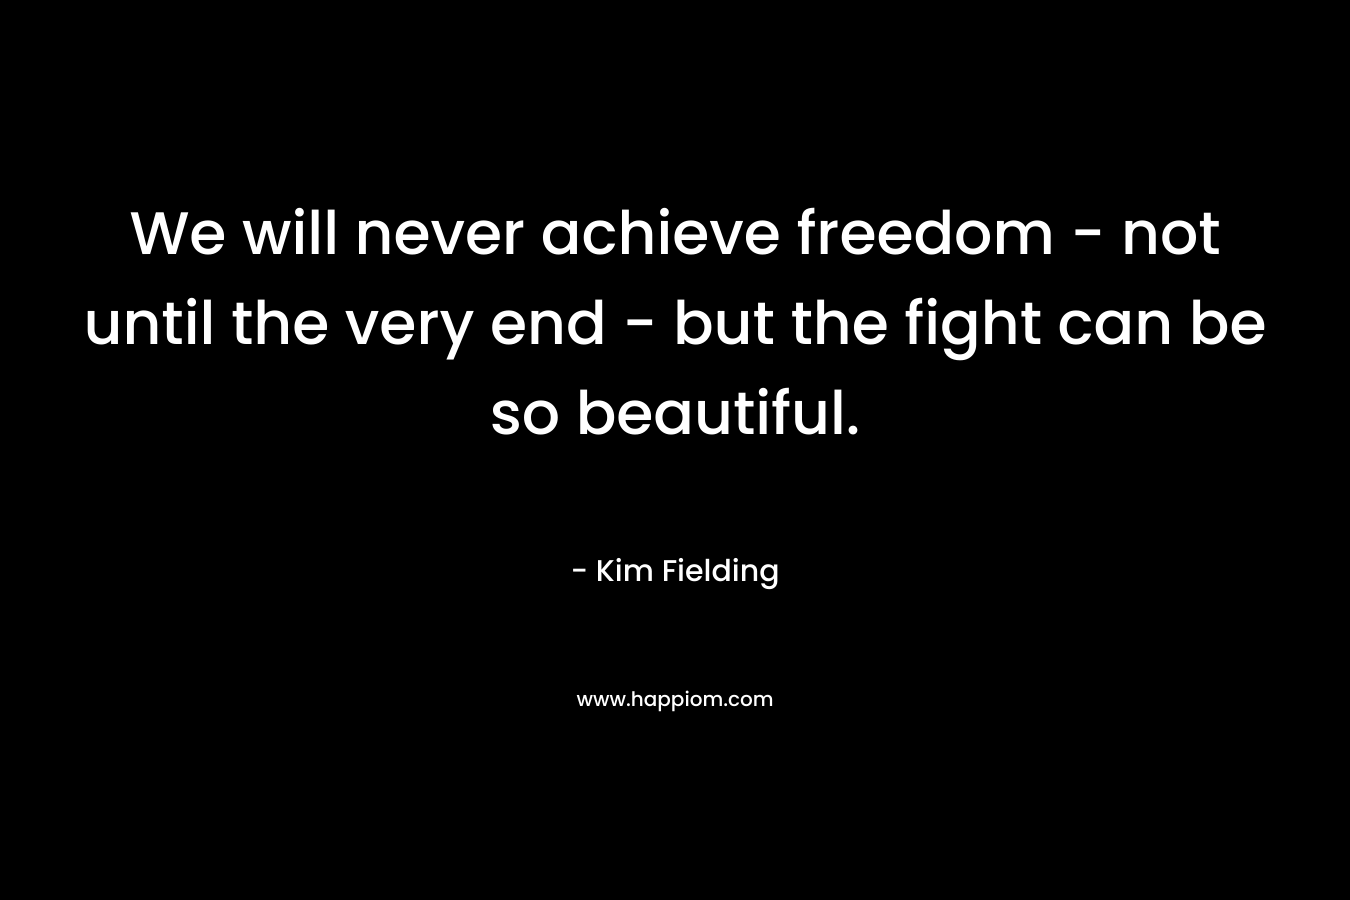 We will never achieve freedom - not until the very end - but the fight can be so beautiful.